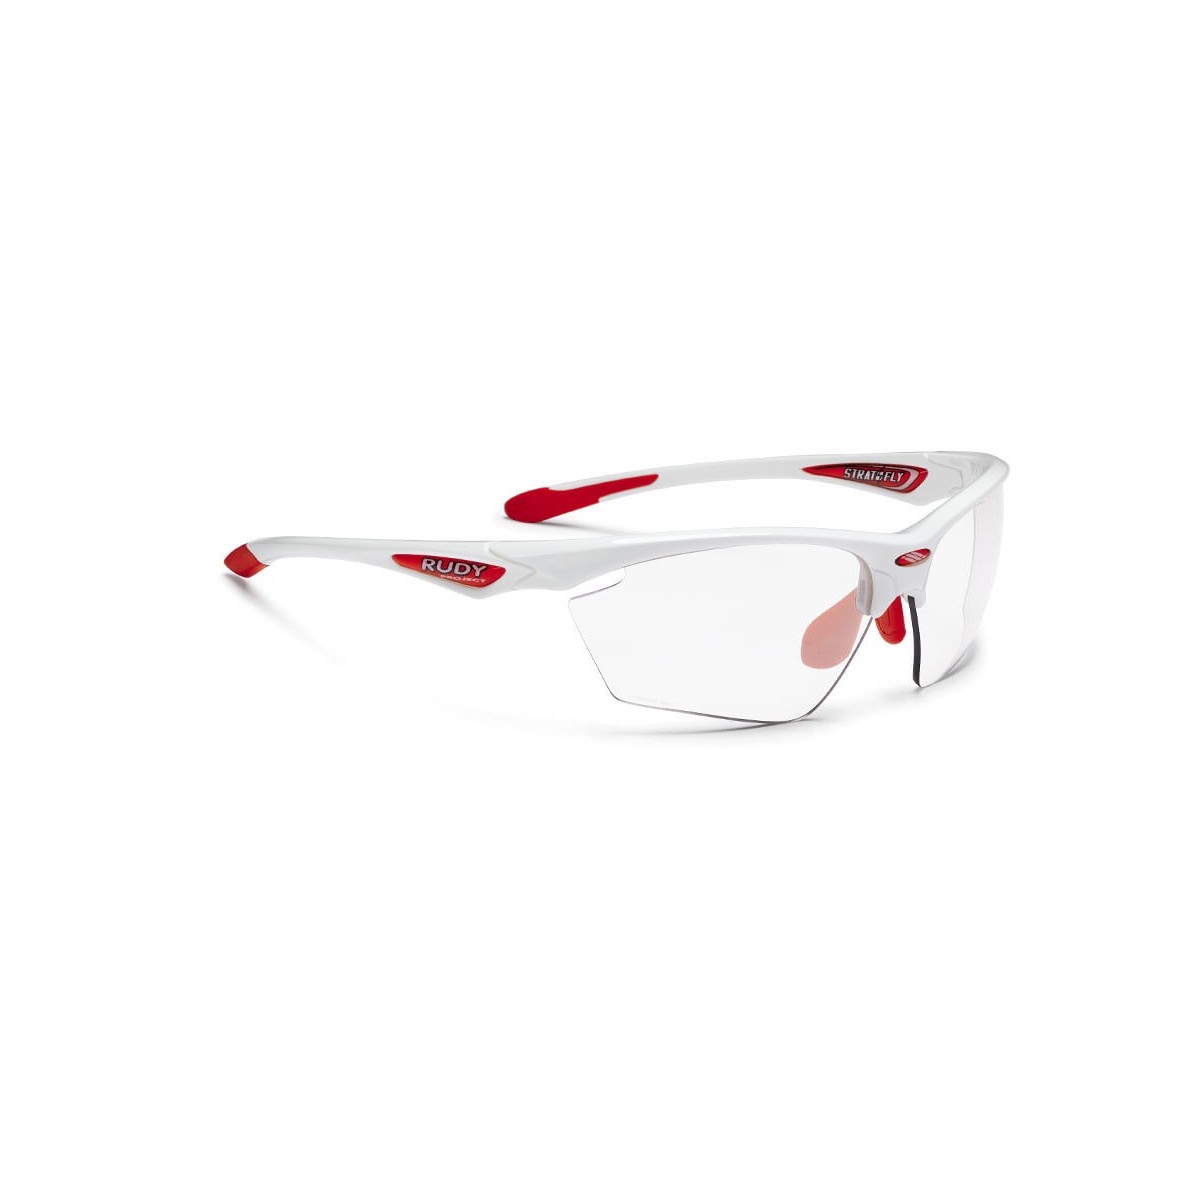 To Fly günstig Kaufen-Brille Stratofly White Gloss RPO Photoclear Rudy Project. Brille Stratofly White Gloss RPO Photoclear Rudy Project . 